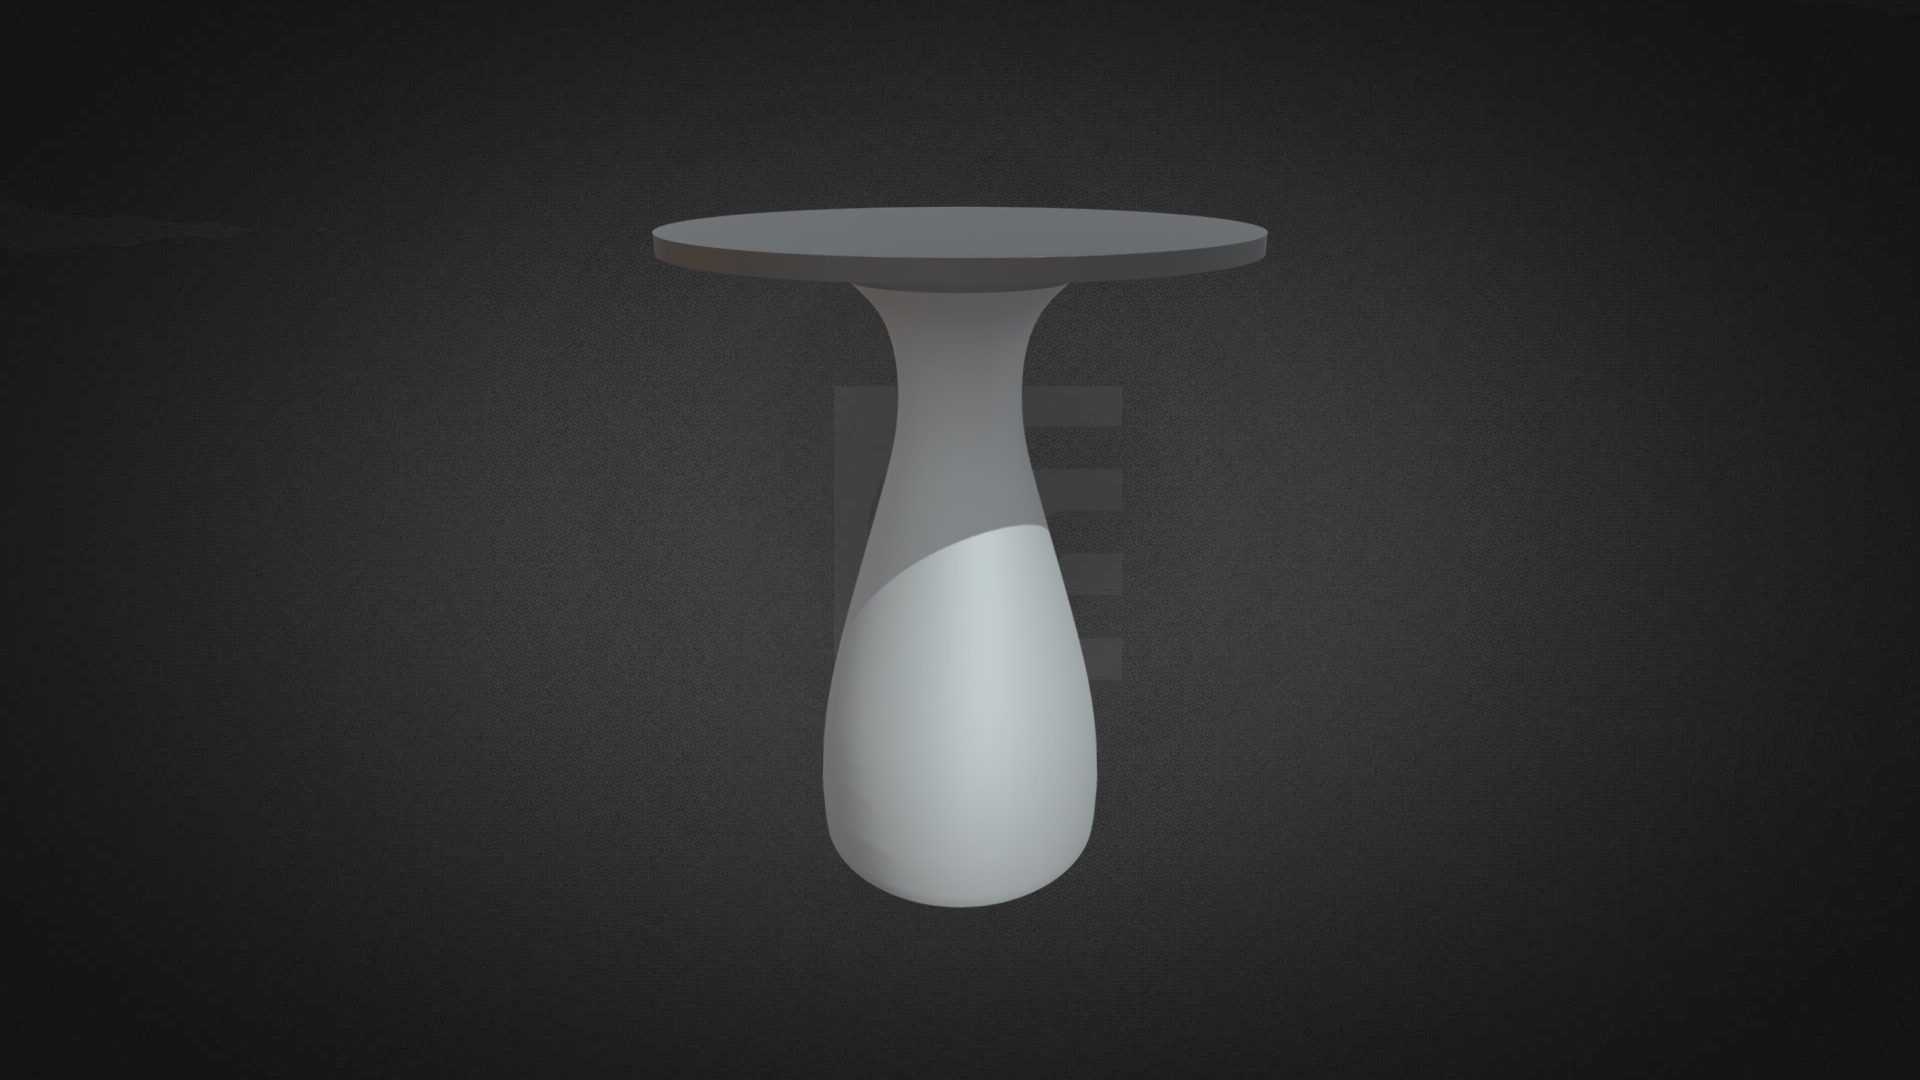 3D model Flut Dining Table Hire - This is a 3D model of the Flut Dining Table Hire. The 3D model is about a white lamp on a black surface.